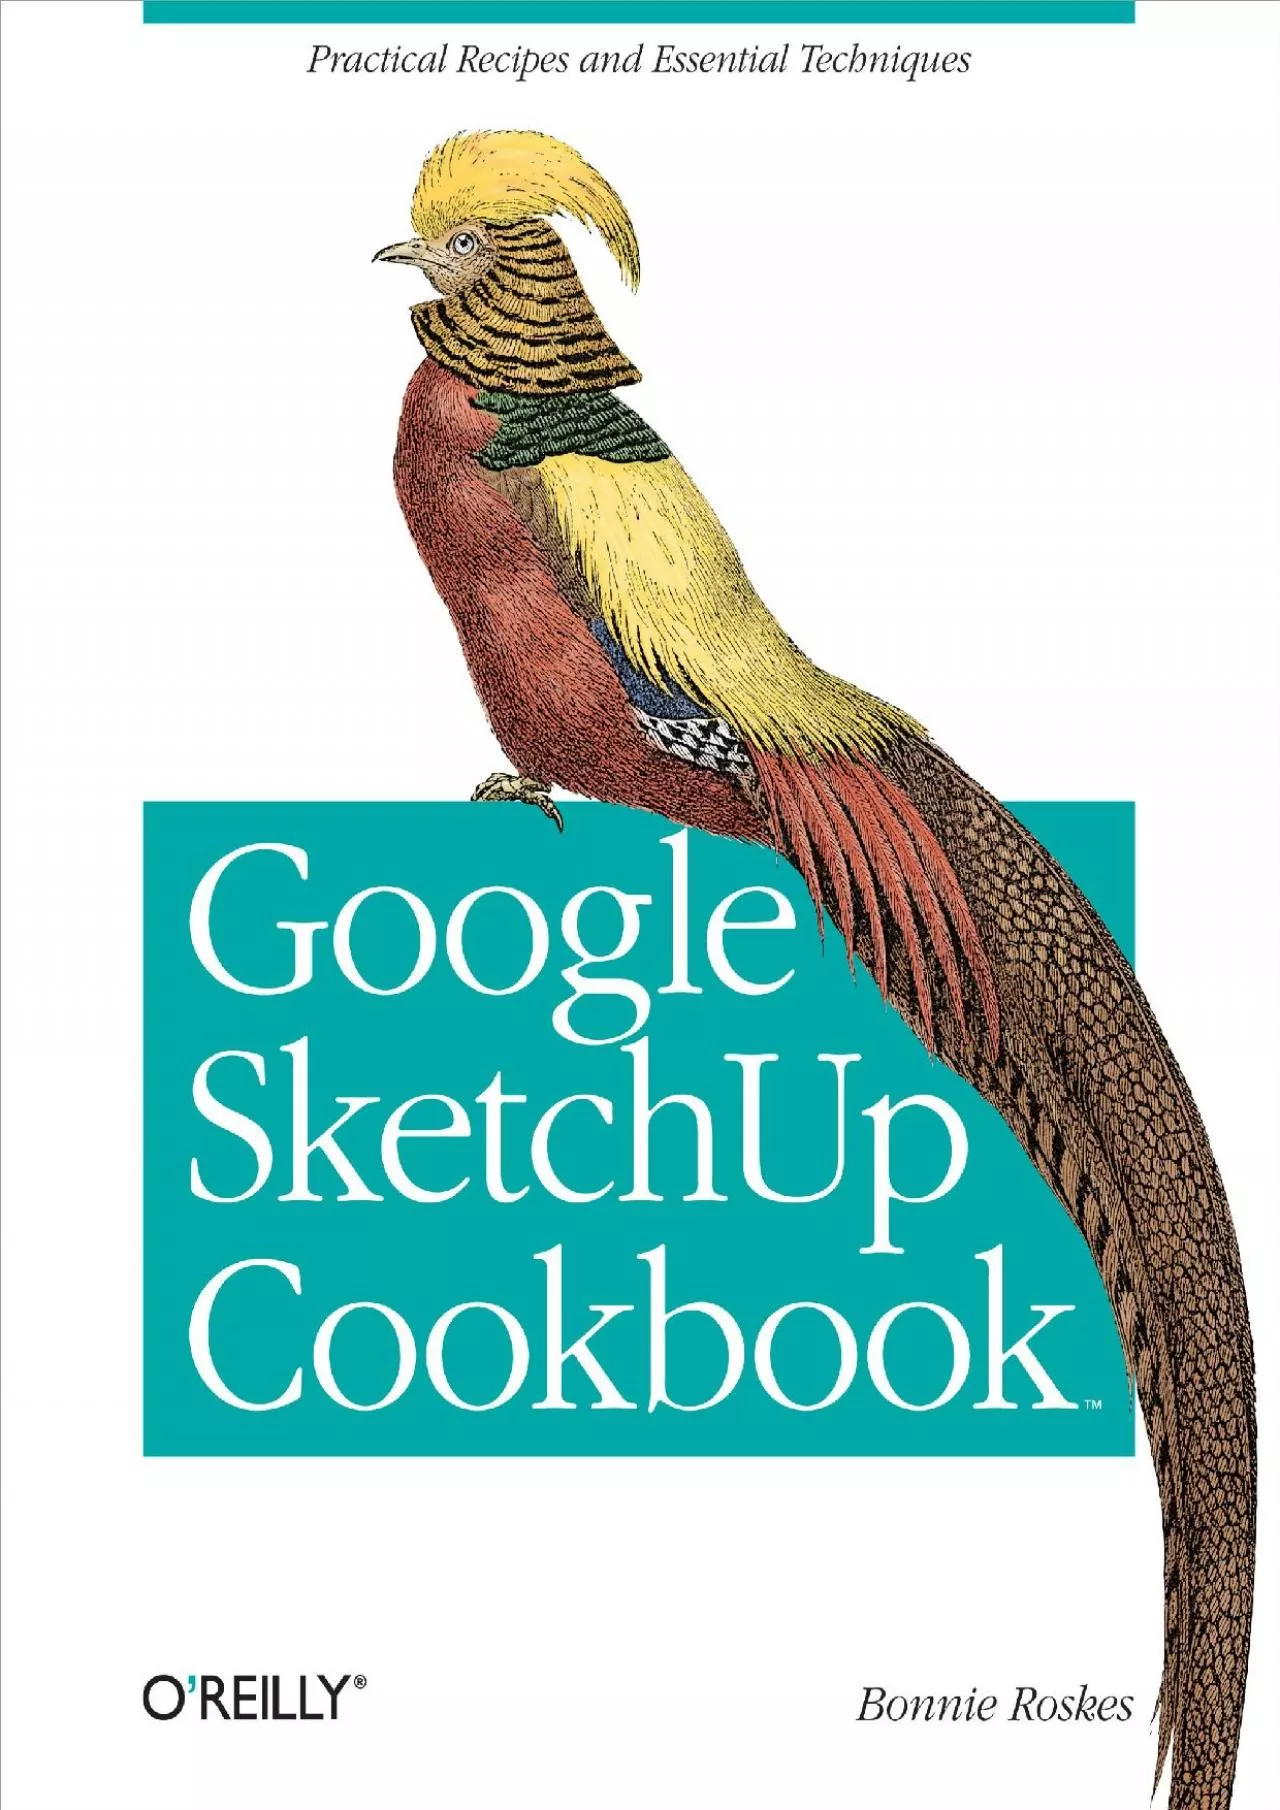 (BOOKS)-Google SketchUp Cookbook: Practical Recipes and Essential Techniques